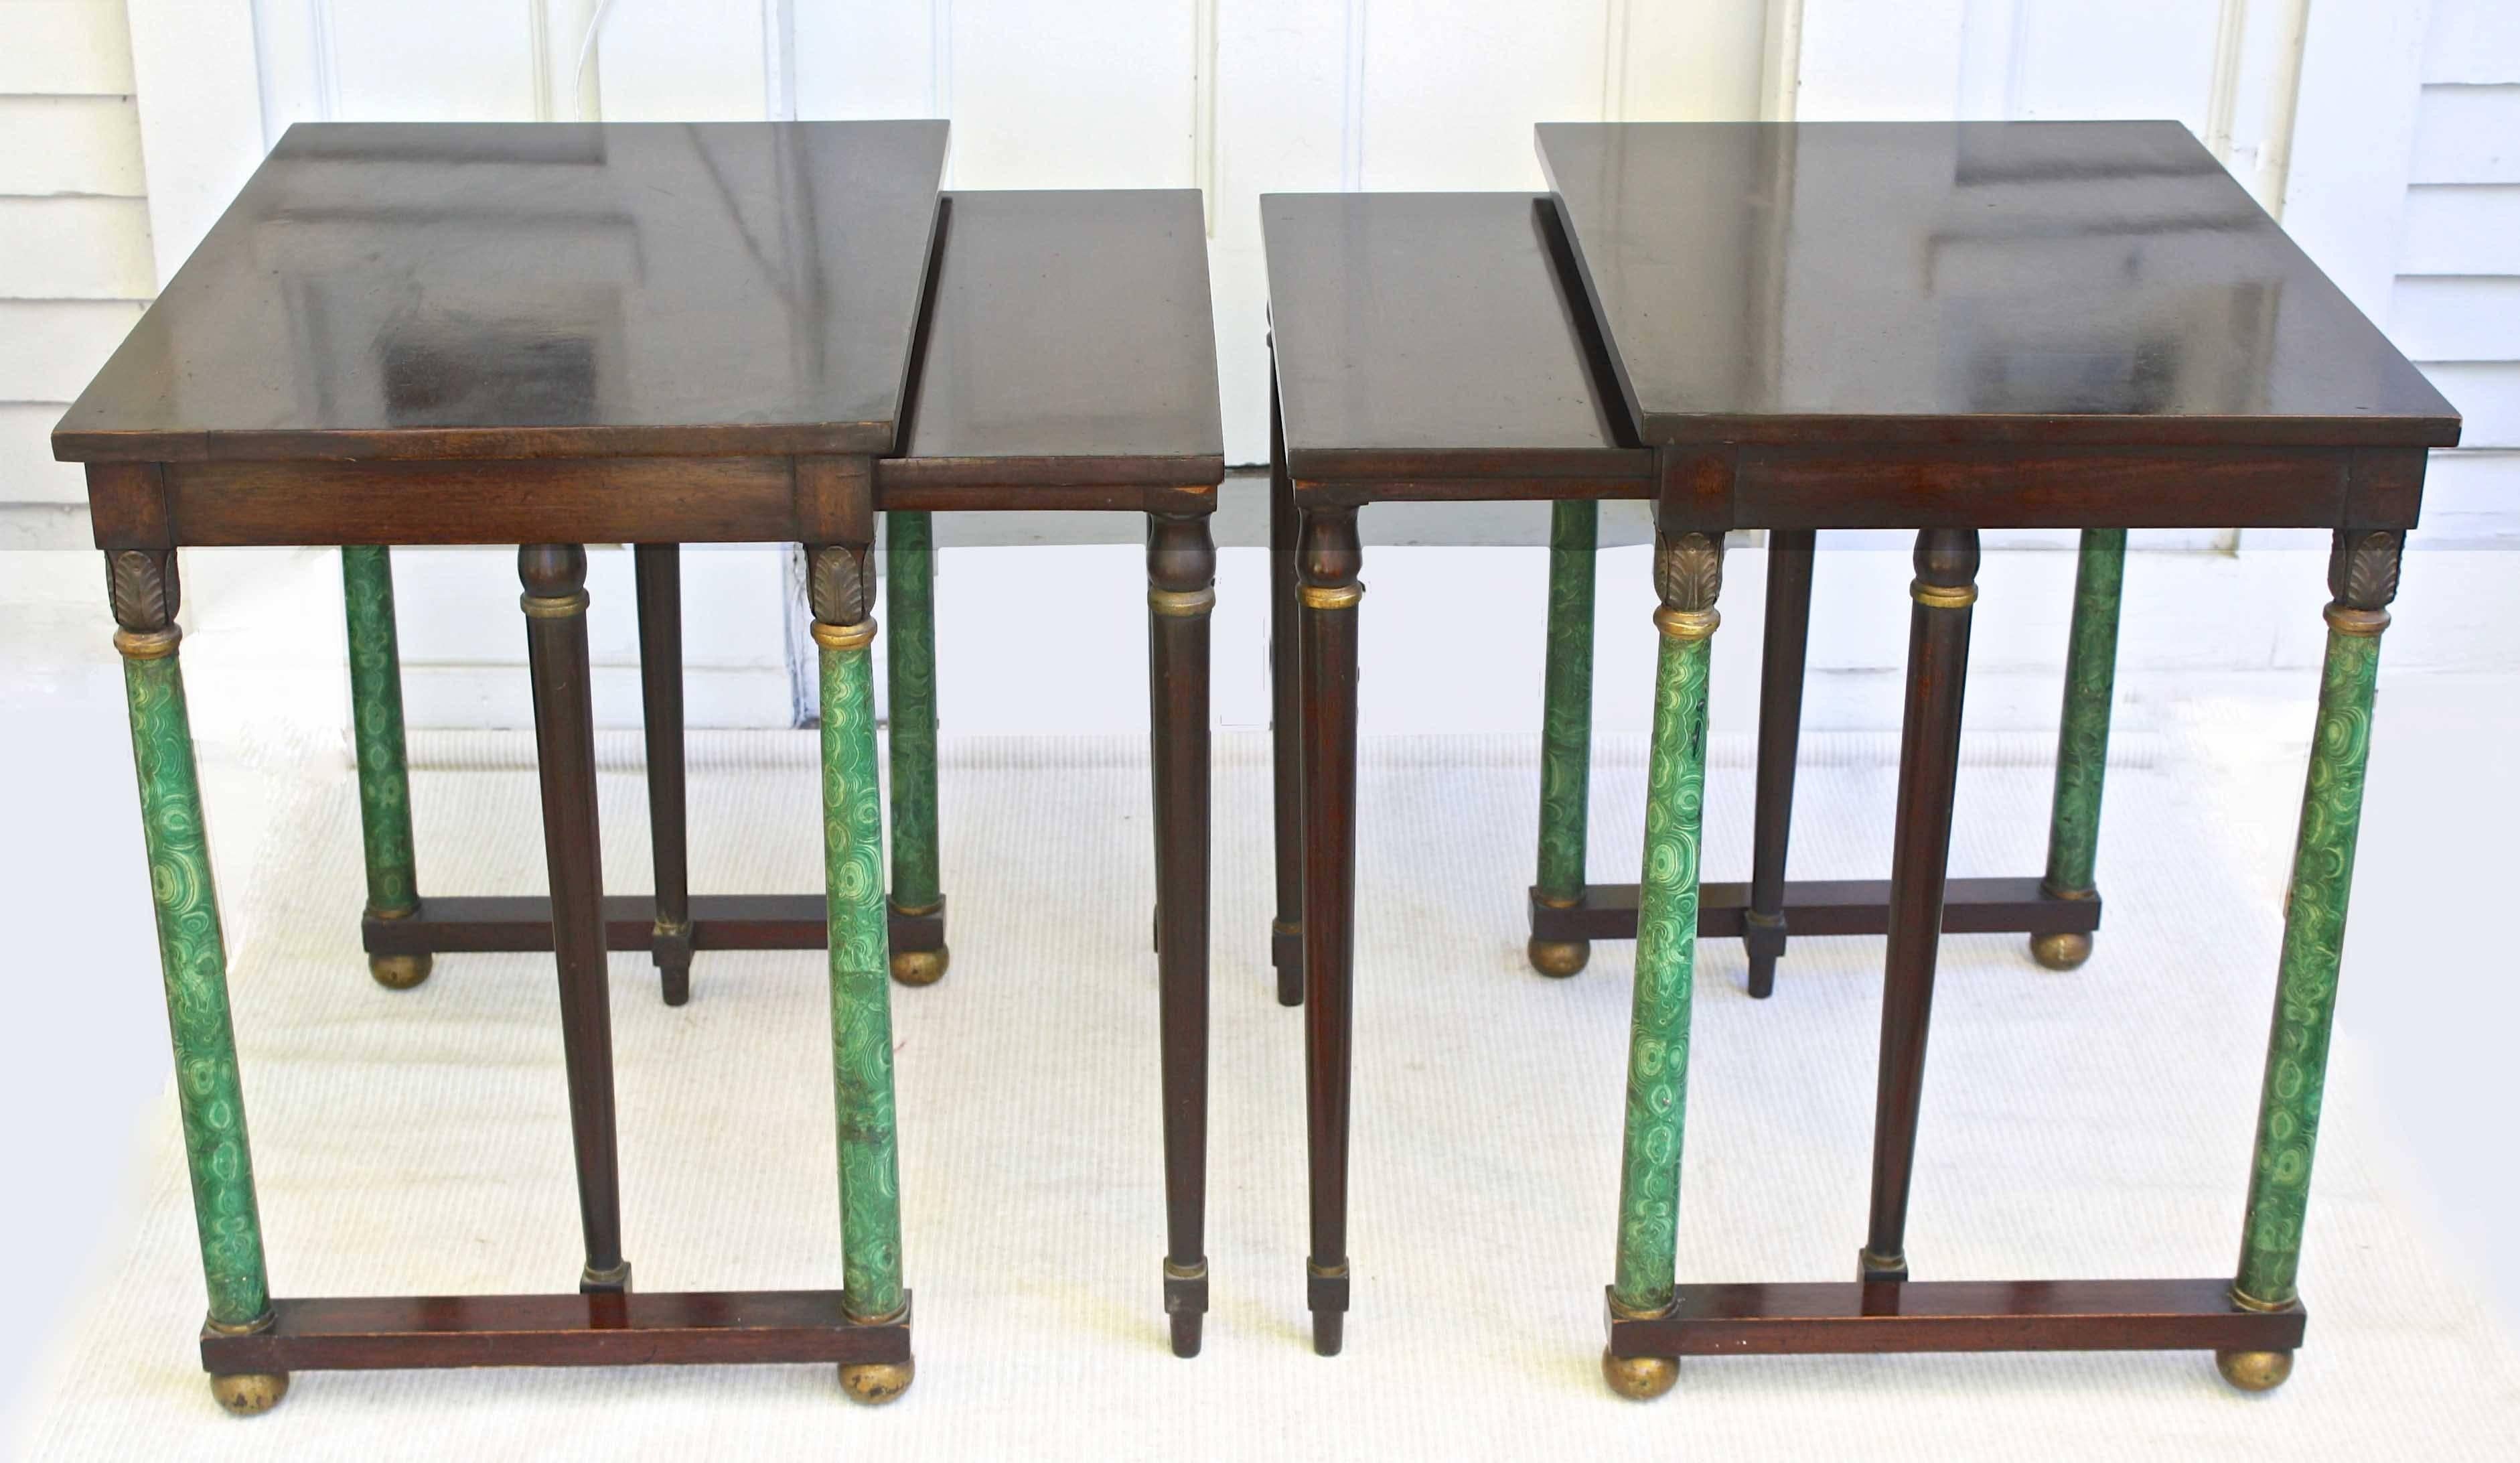 Bench made possibly bespoke pair of First Empire Revival nesting tables; each usable as sofa end tables. May also be placed back-to-back for use as a center table (suggested by Image 6), measuring 40 inches by 28 inches.
Measurements of each of the